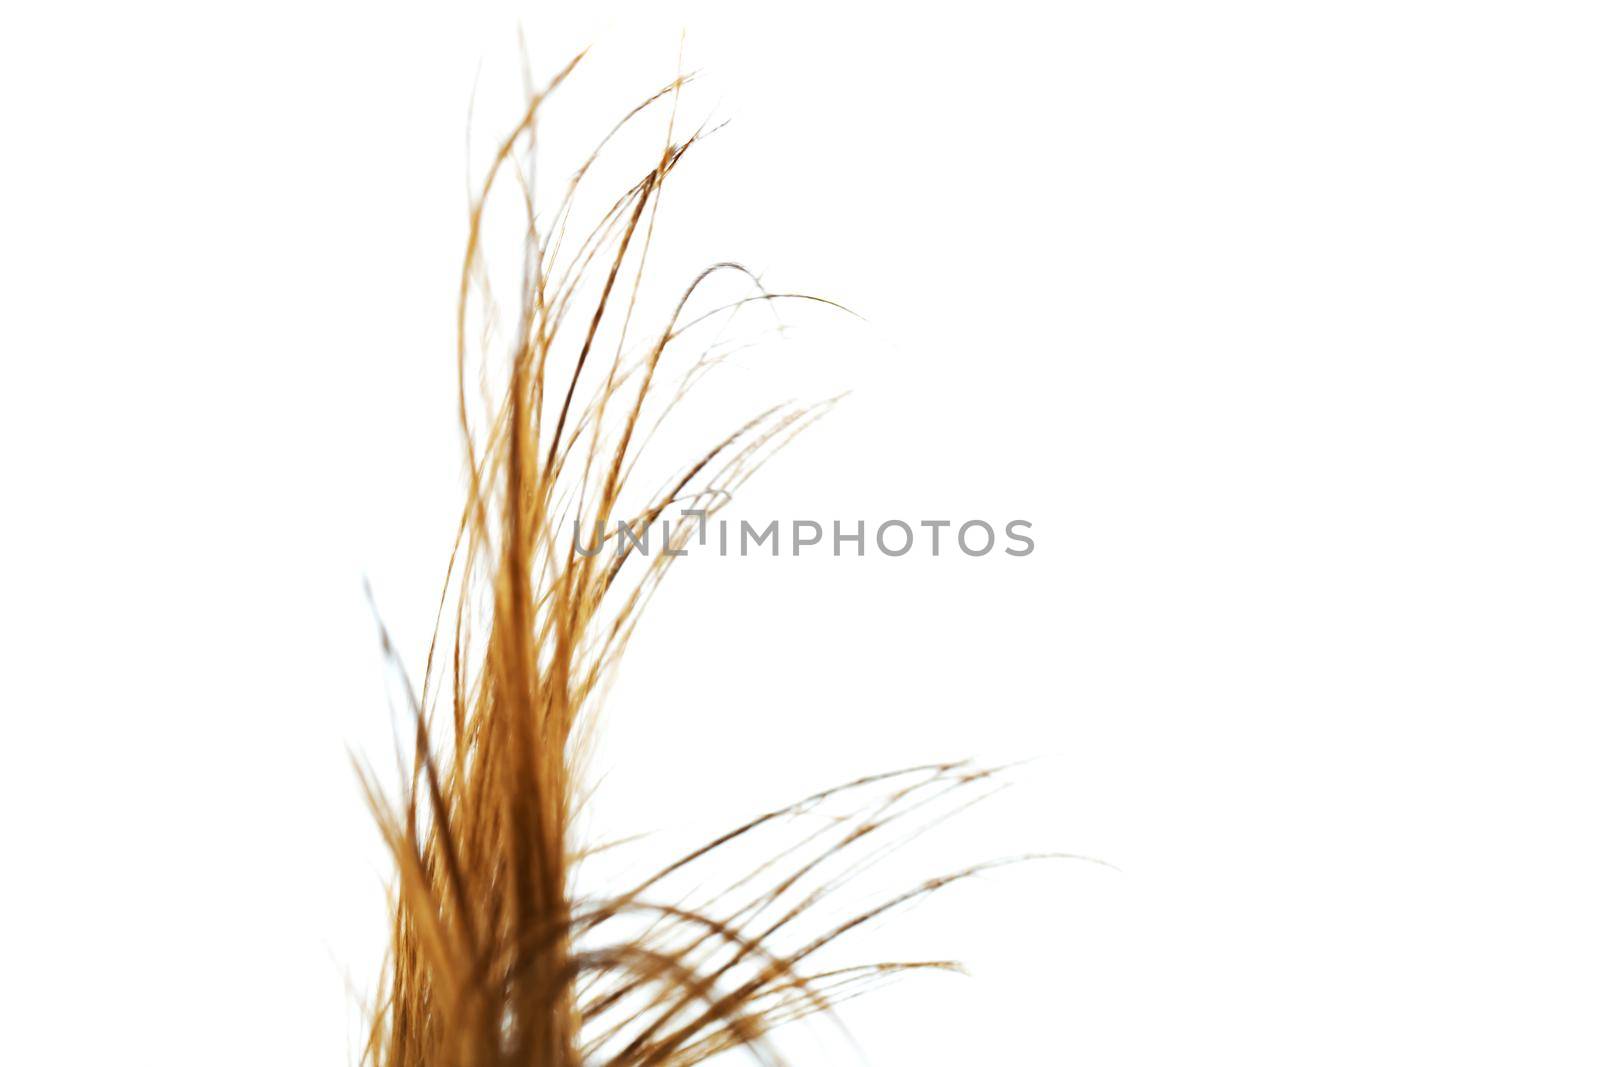 Windy hair. Abstract close up hairs on white background. by kokimk